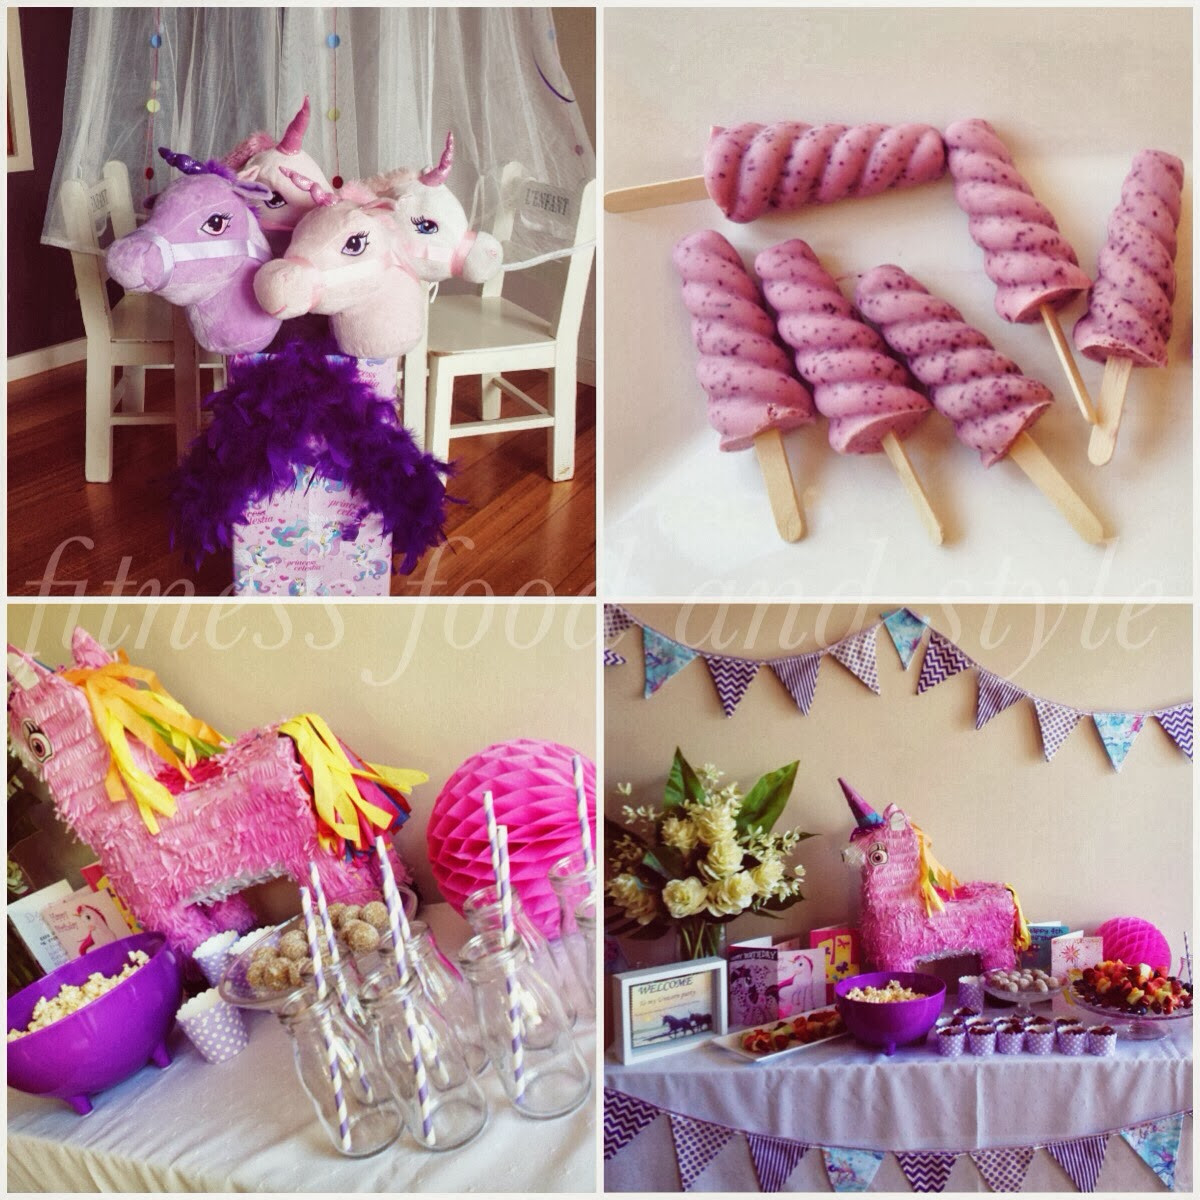 Healthy Unicorn Party Food Ideas
 Fitness Food and Style A healthy Unicorn party for